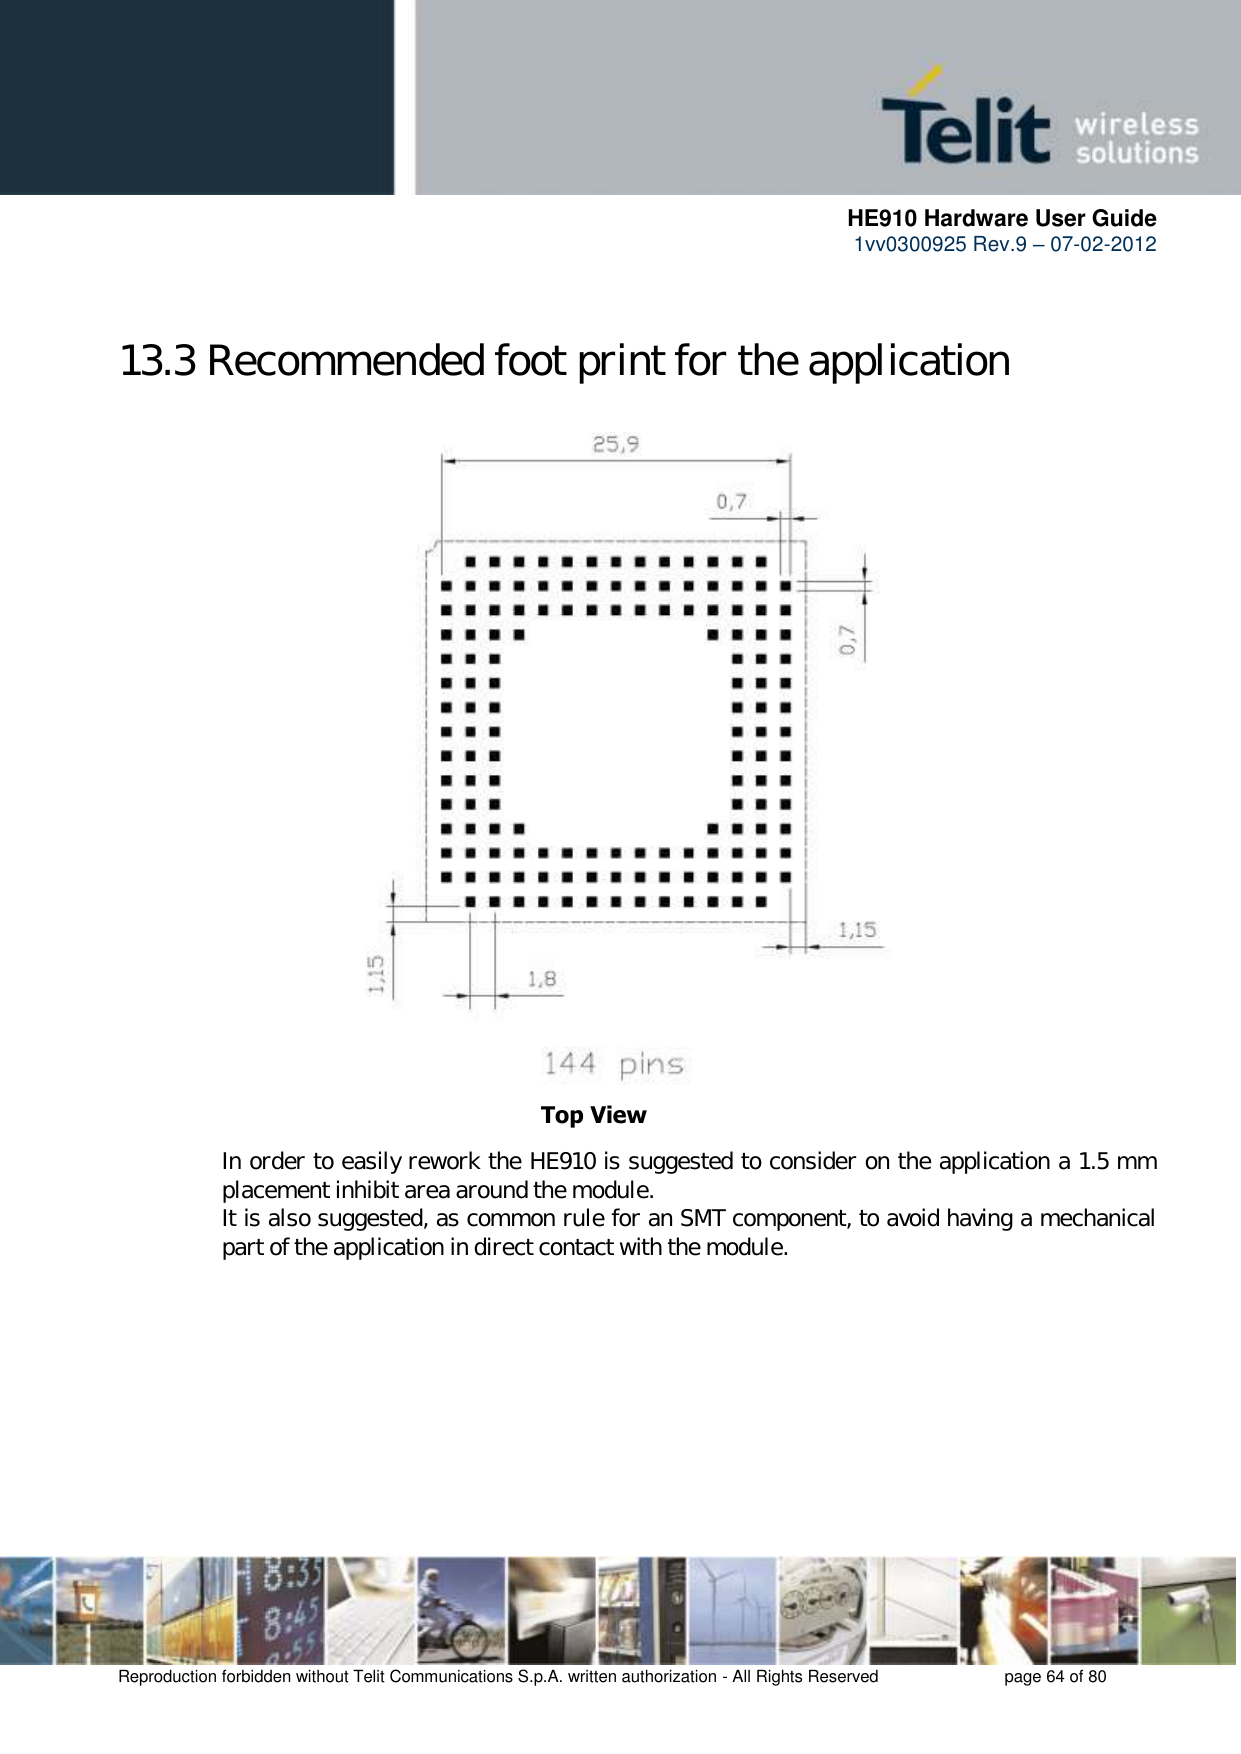      HE910 Hardware User Guide 1vv0300925 Rev.9 – 07-02-2012    Reproduction forbidden without Telit Communications S.p.A. written authorization - All Rights Reserved    page 64 of 80   13.3 Recommended foot print for the application                        In order to easily rework the HE910 is suggested to consider on the application a 1.5 mm placement inhibit area around the module. It is also suggested, as common rule for an SMT component, to avoid having a mechanical part of the application in direct contact with the module.     Top View 